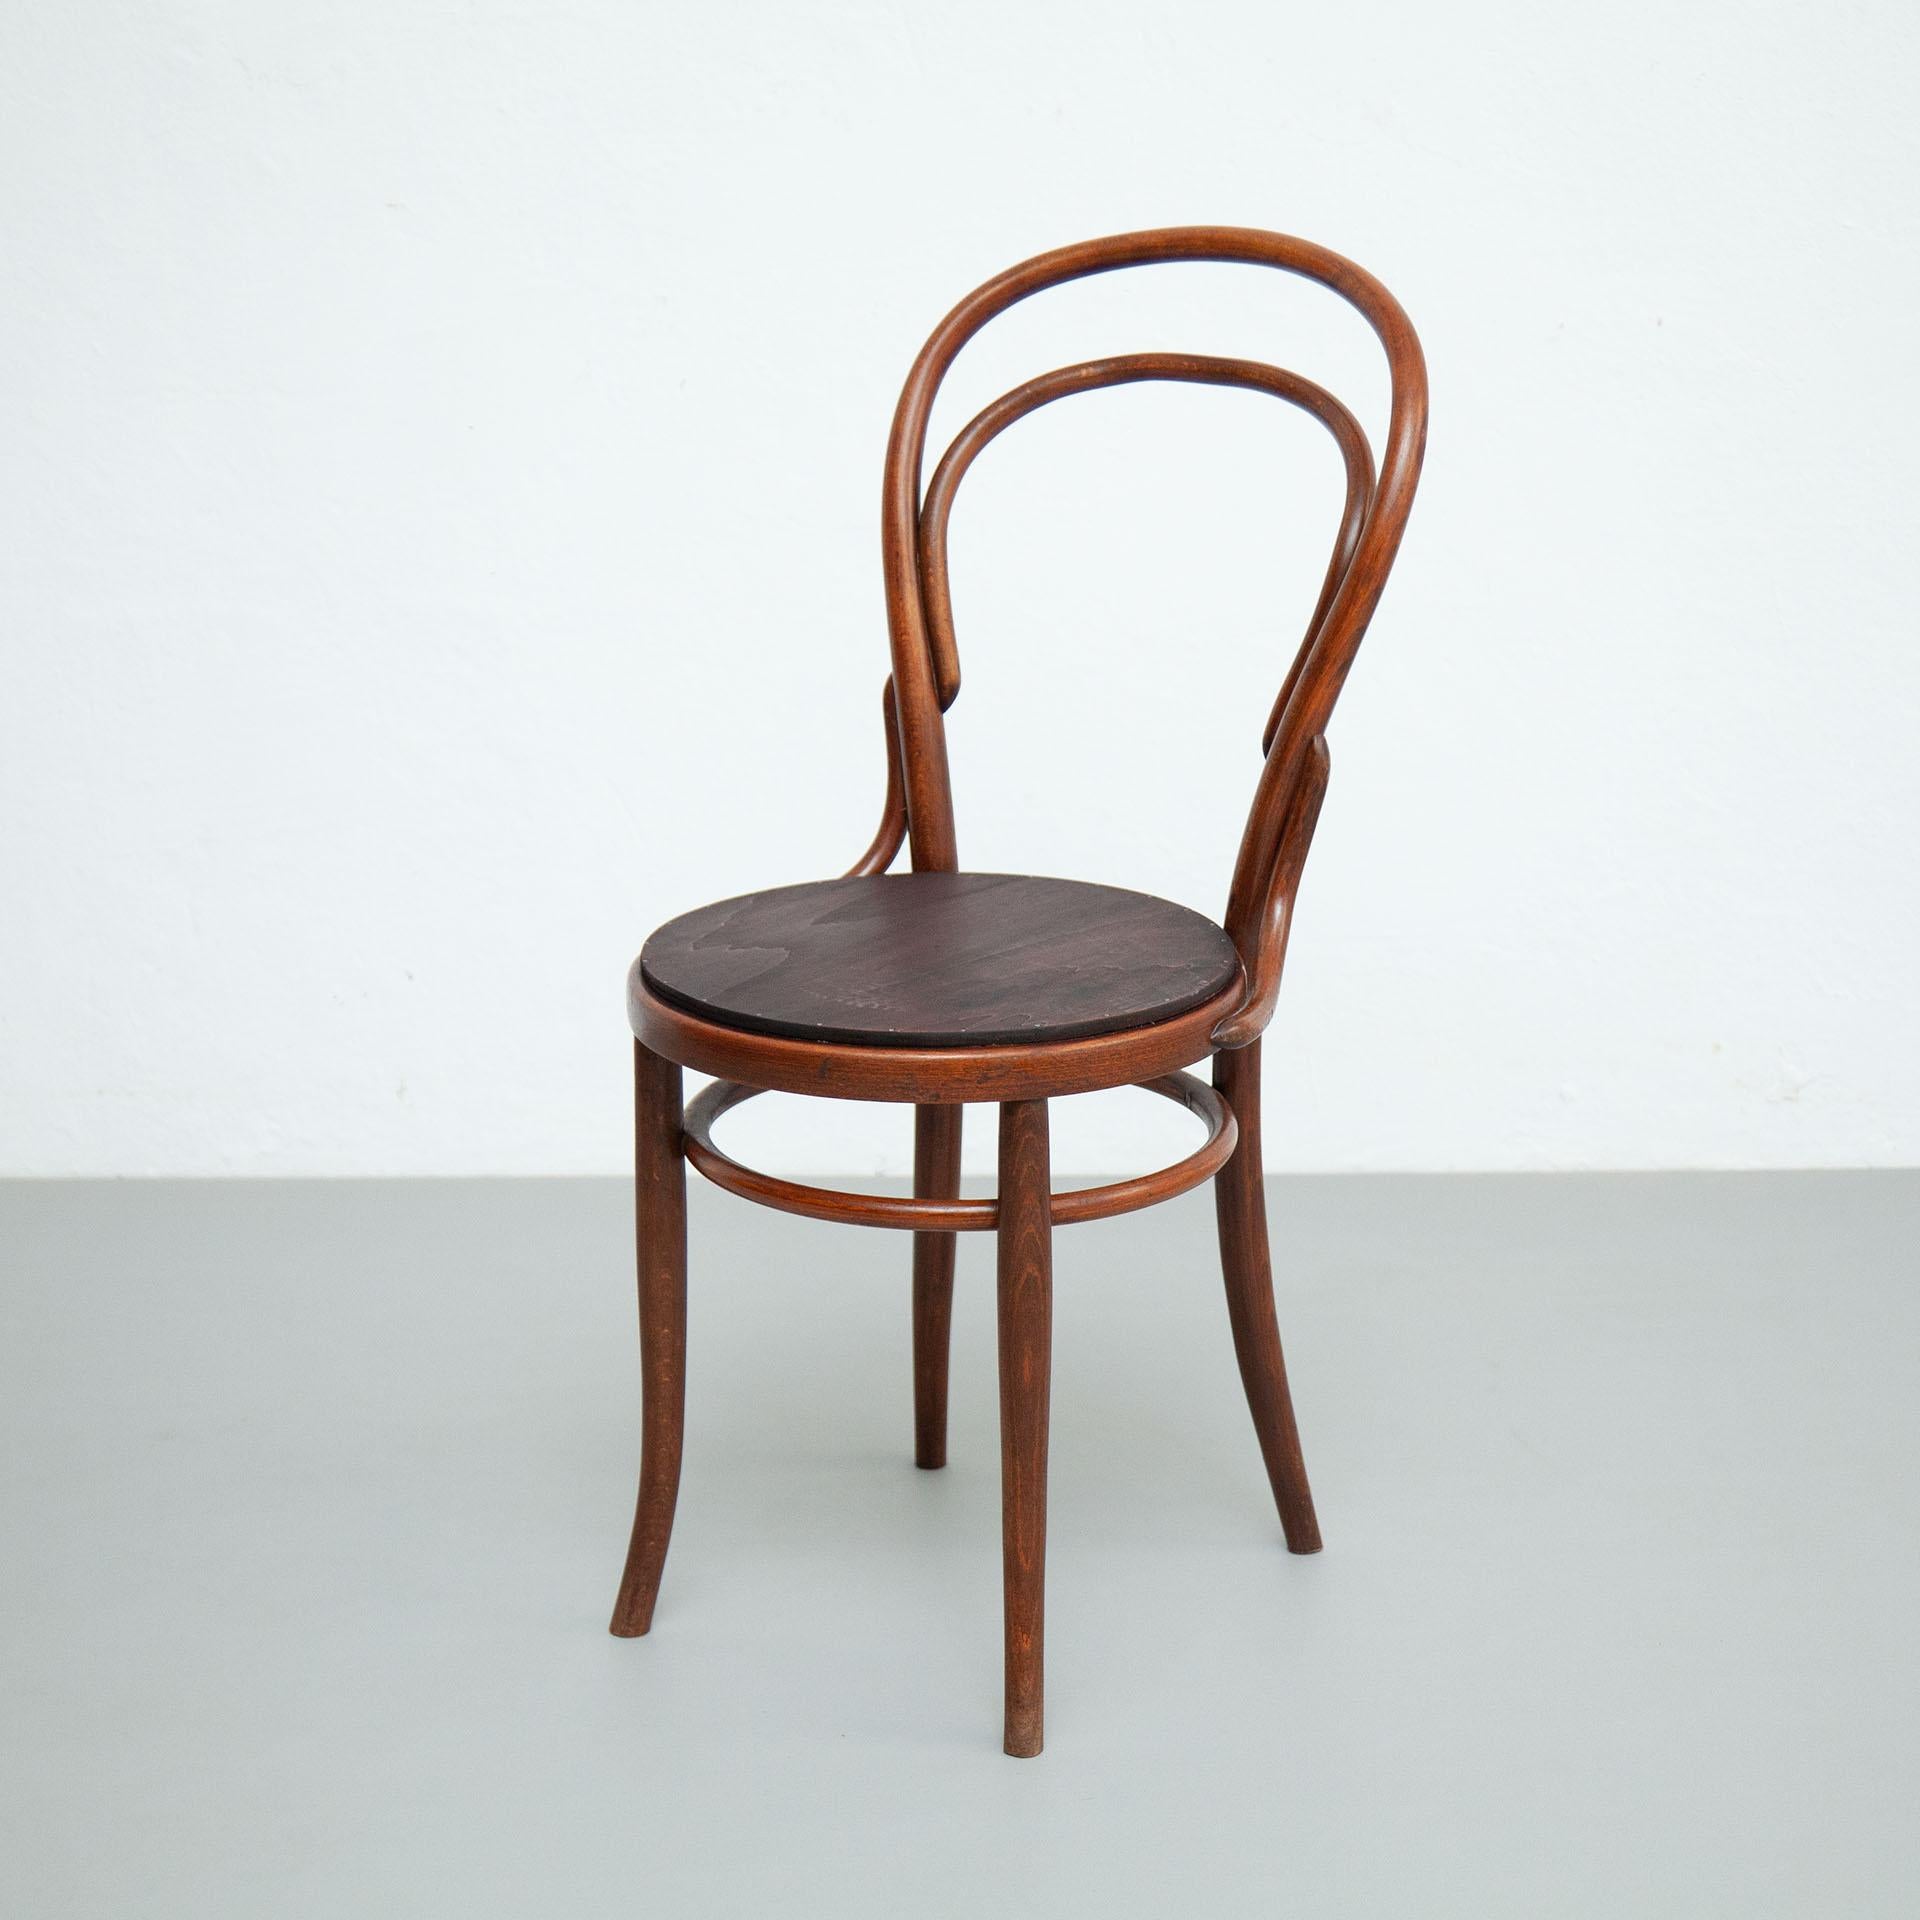 Bentwood chair by unknown designer and manufacturer in the style of Thonet.
Made in Austria, circa 1930.

In original condition with minor wear consistent with age and use, preserving a beautiful patina.
The wood seat has been added later by